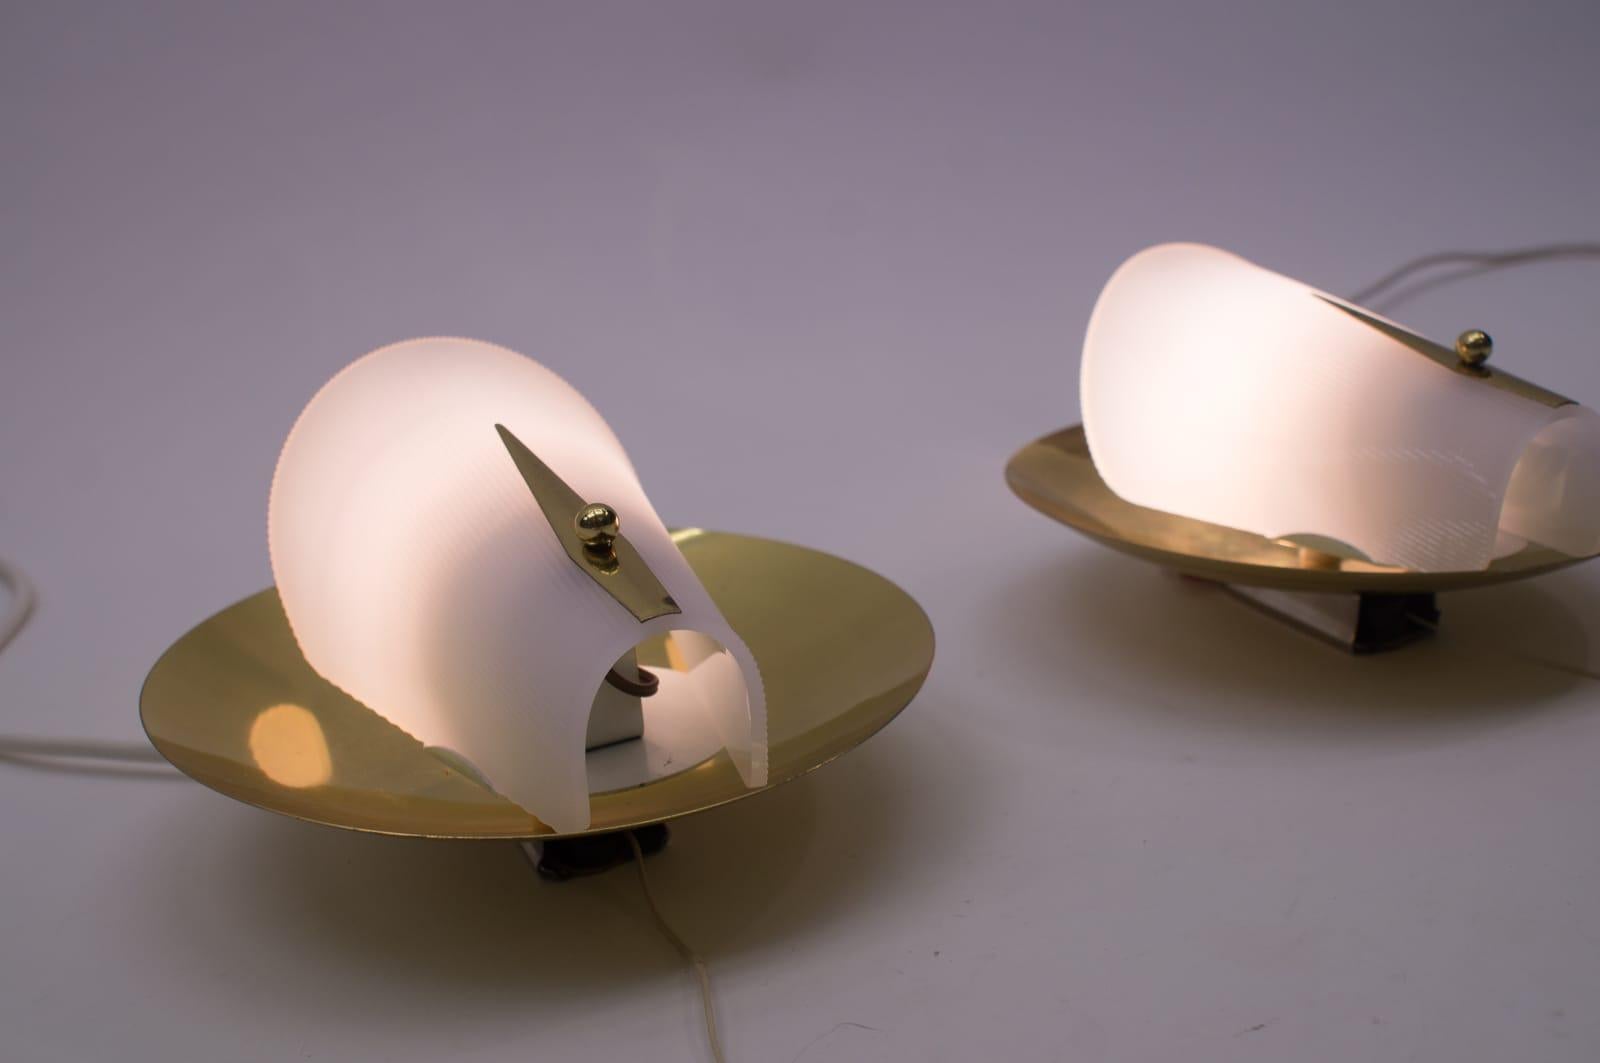 Set of Two Mid-Century Modern Brass Wall Lamps or Sconces, 1950s For Sale 1